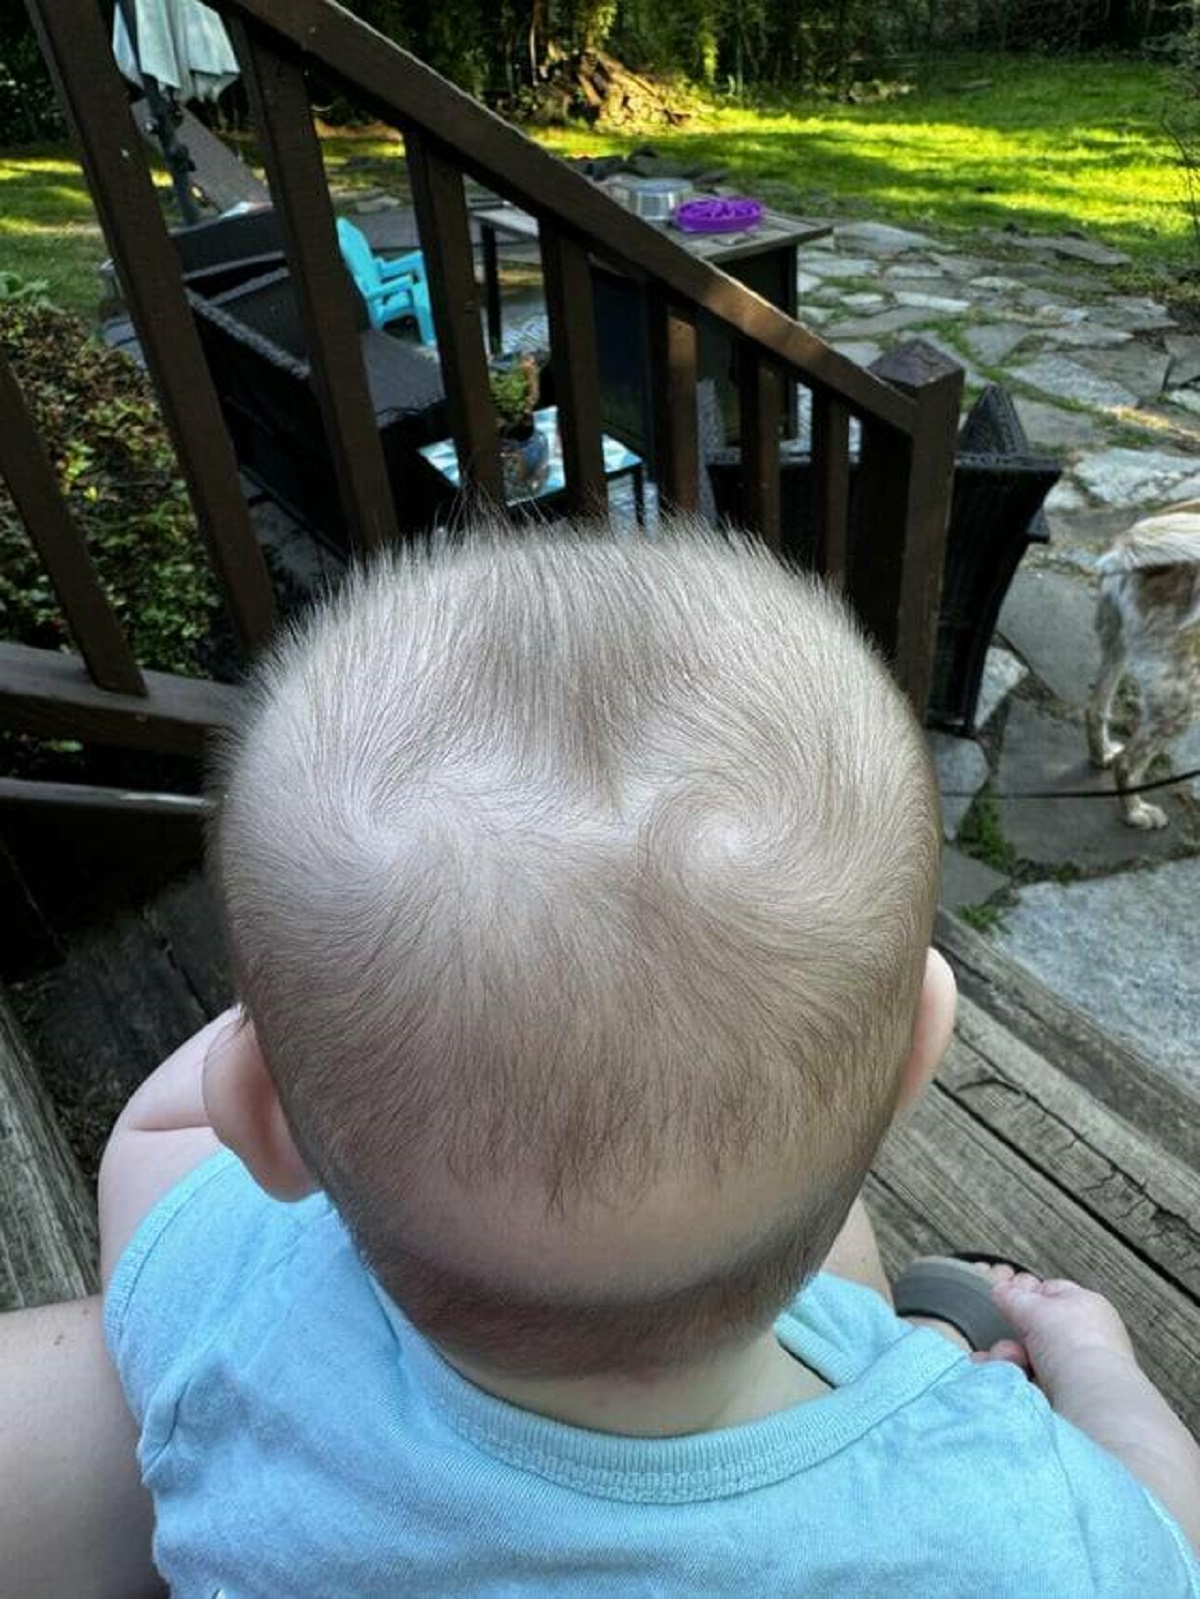 "My 6 month old has double cowlicks"